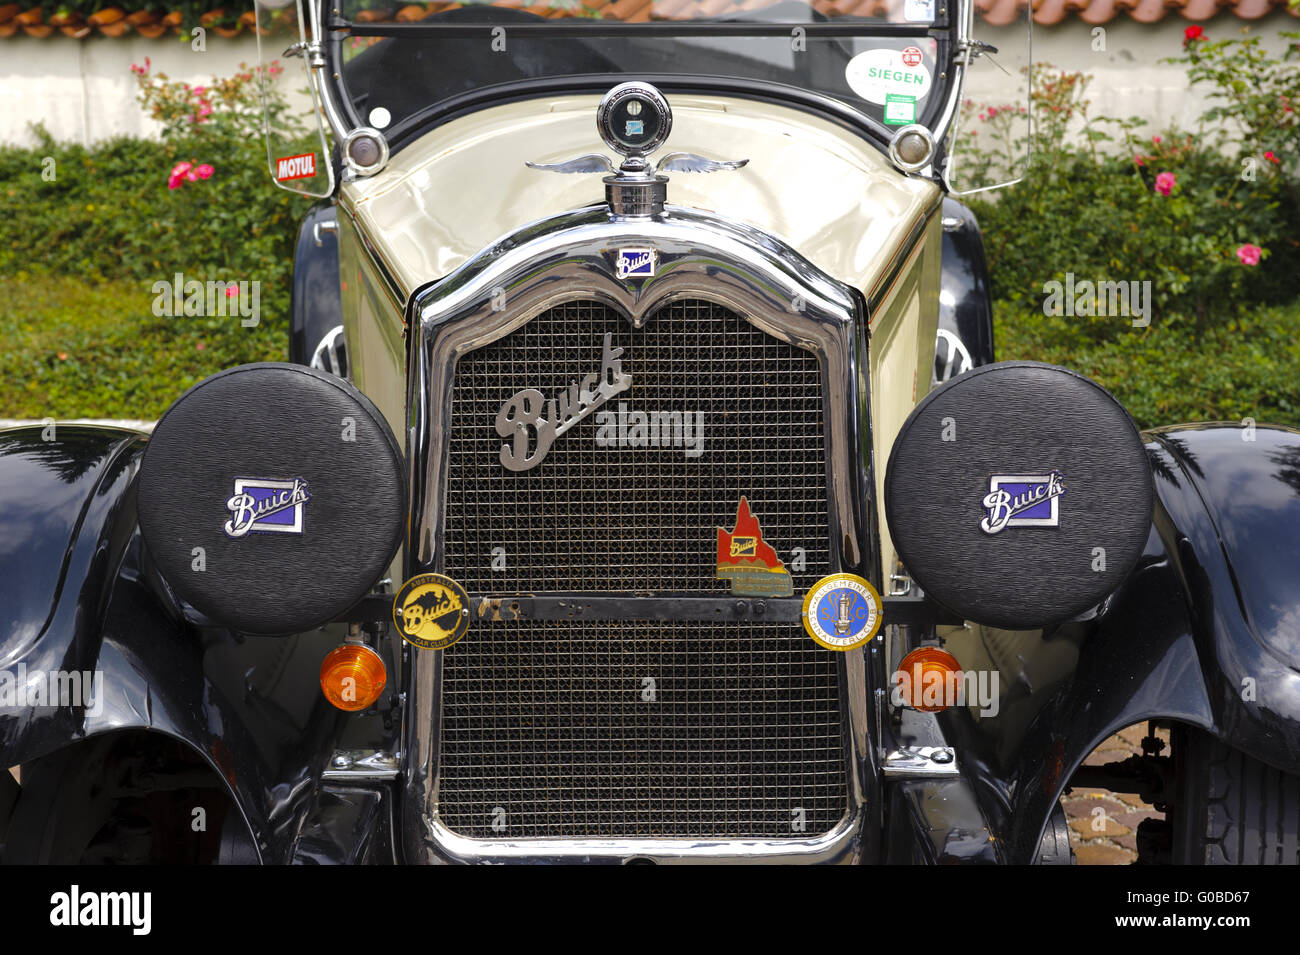 rally for at least 80 years old veteran cars Stock Photo